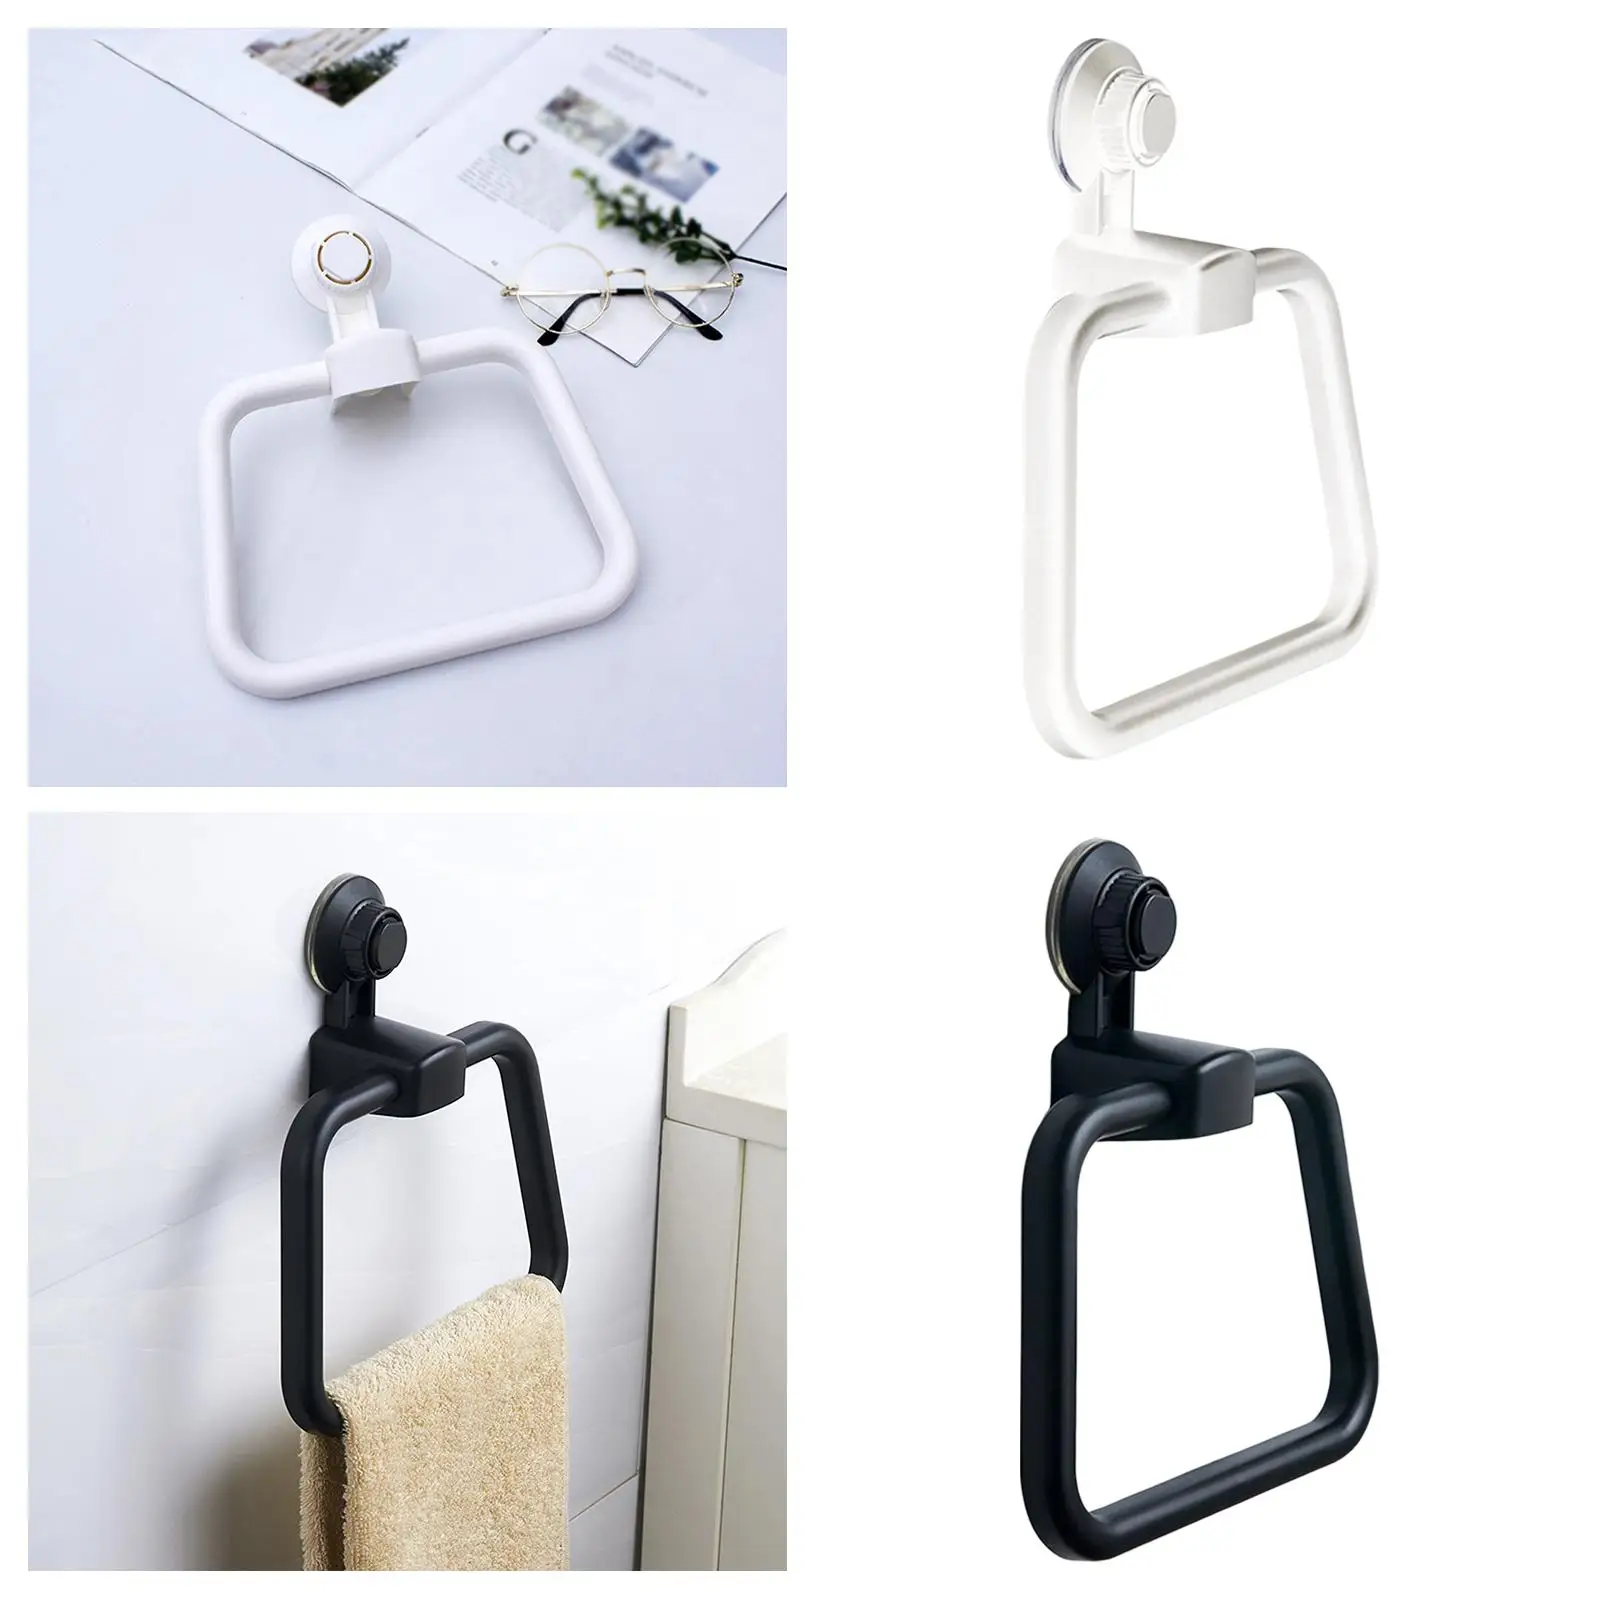 Towel Holder Easy to Install Washcloth Hand Towel Holder Suction Towel Rings for Bathroom Kitchen Home Wall Laundry Room